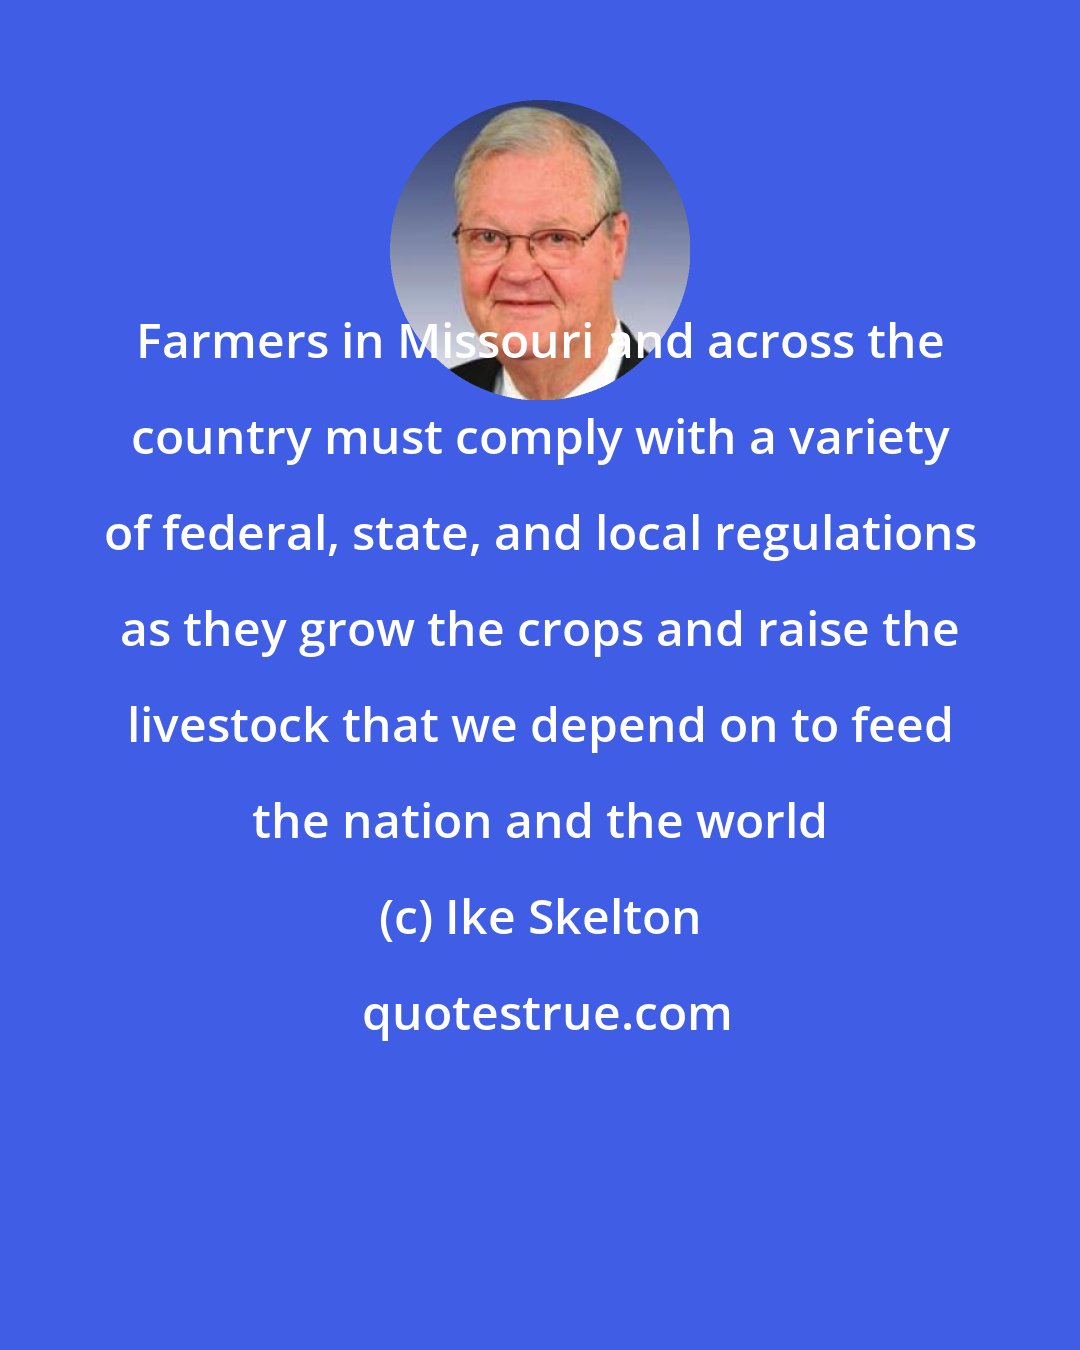 Ike Skelton: Farmers in Missouri and across the country must comply with a variety of federal, state, and local regulations as they grow the crops and raise the livestock that we depend on to feed the nation and the world